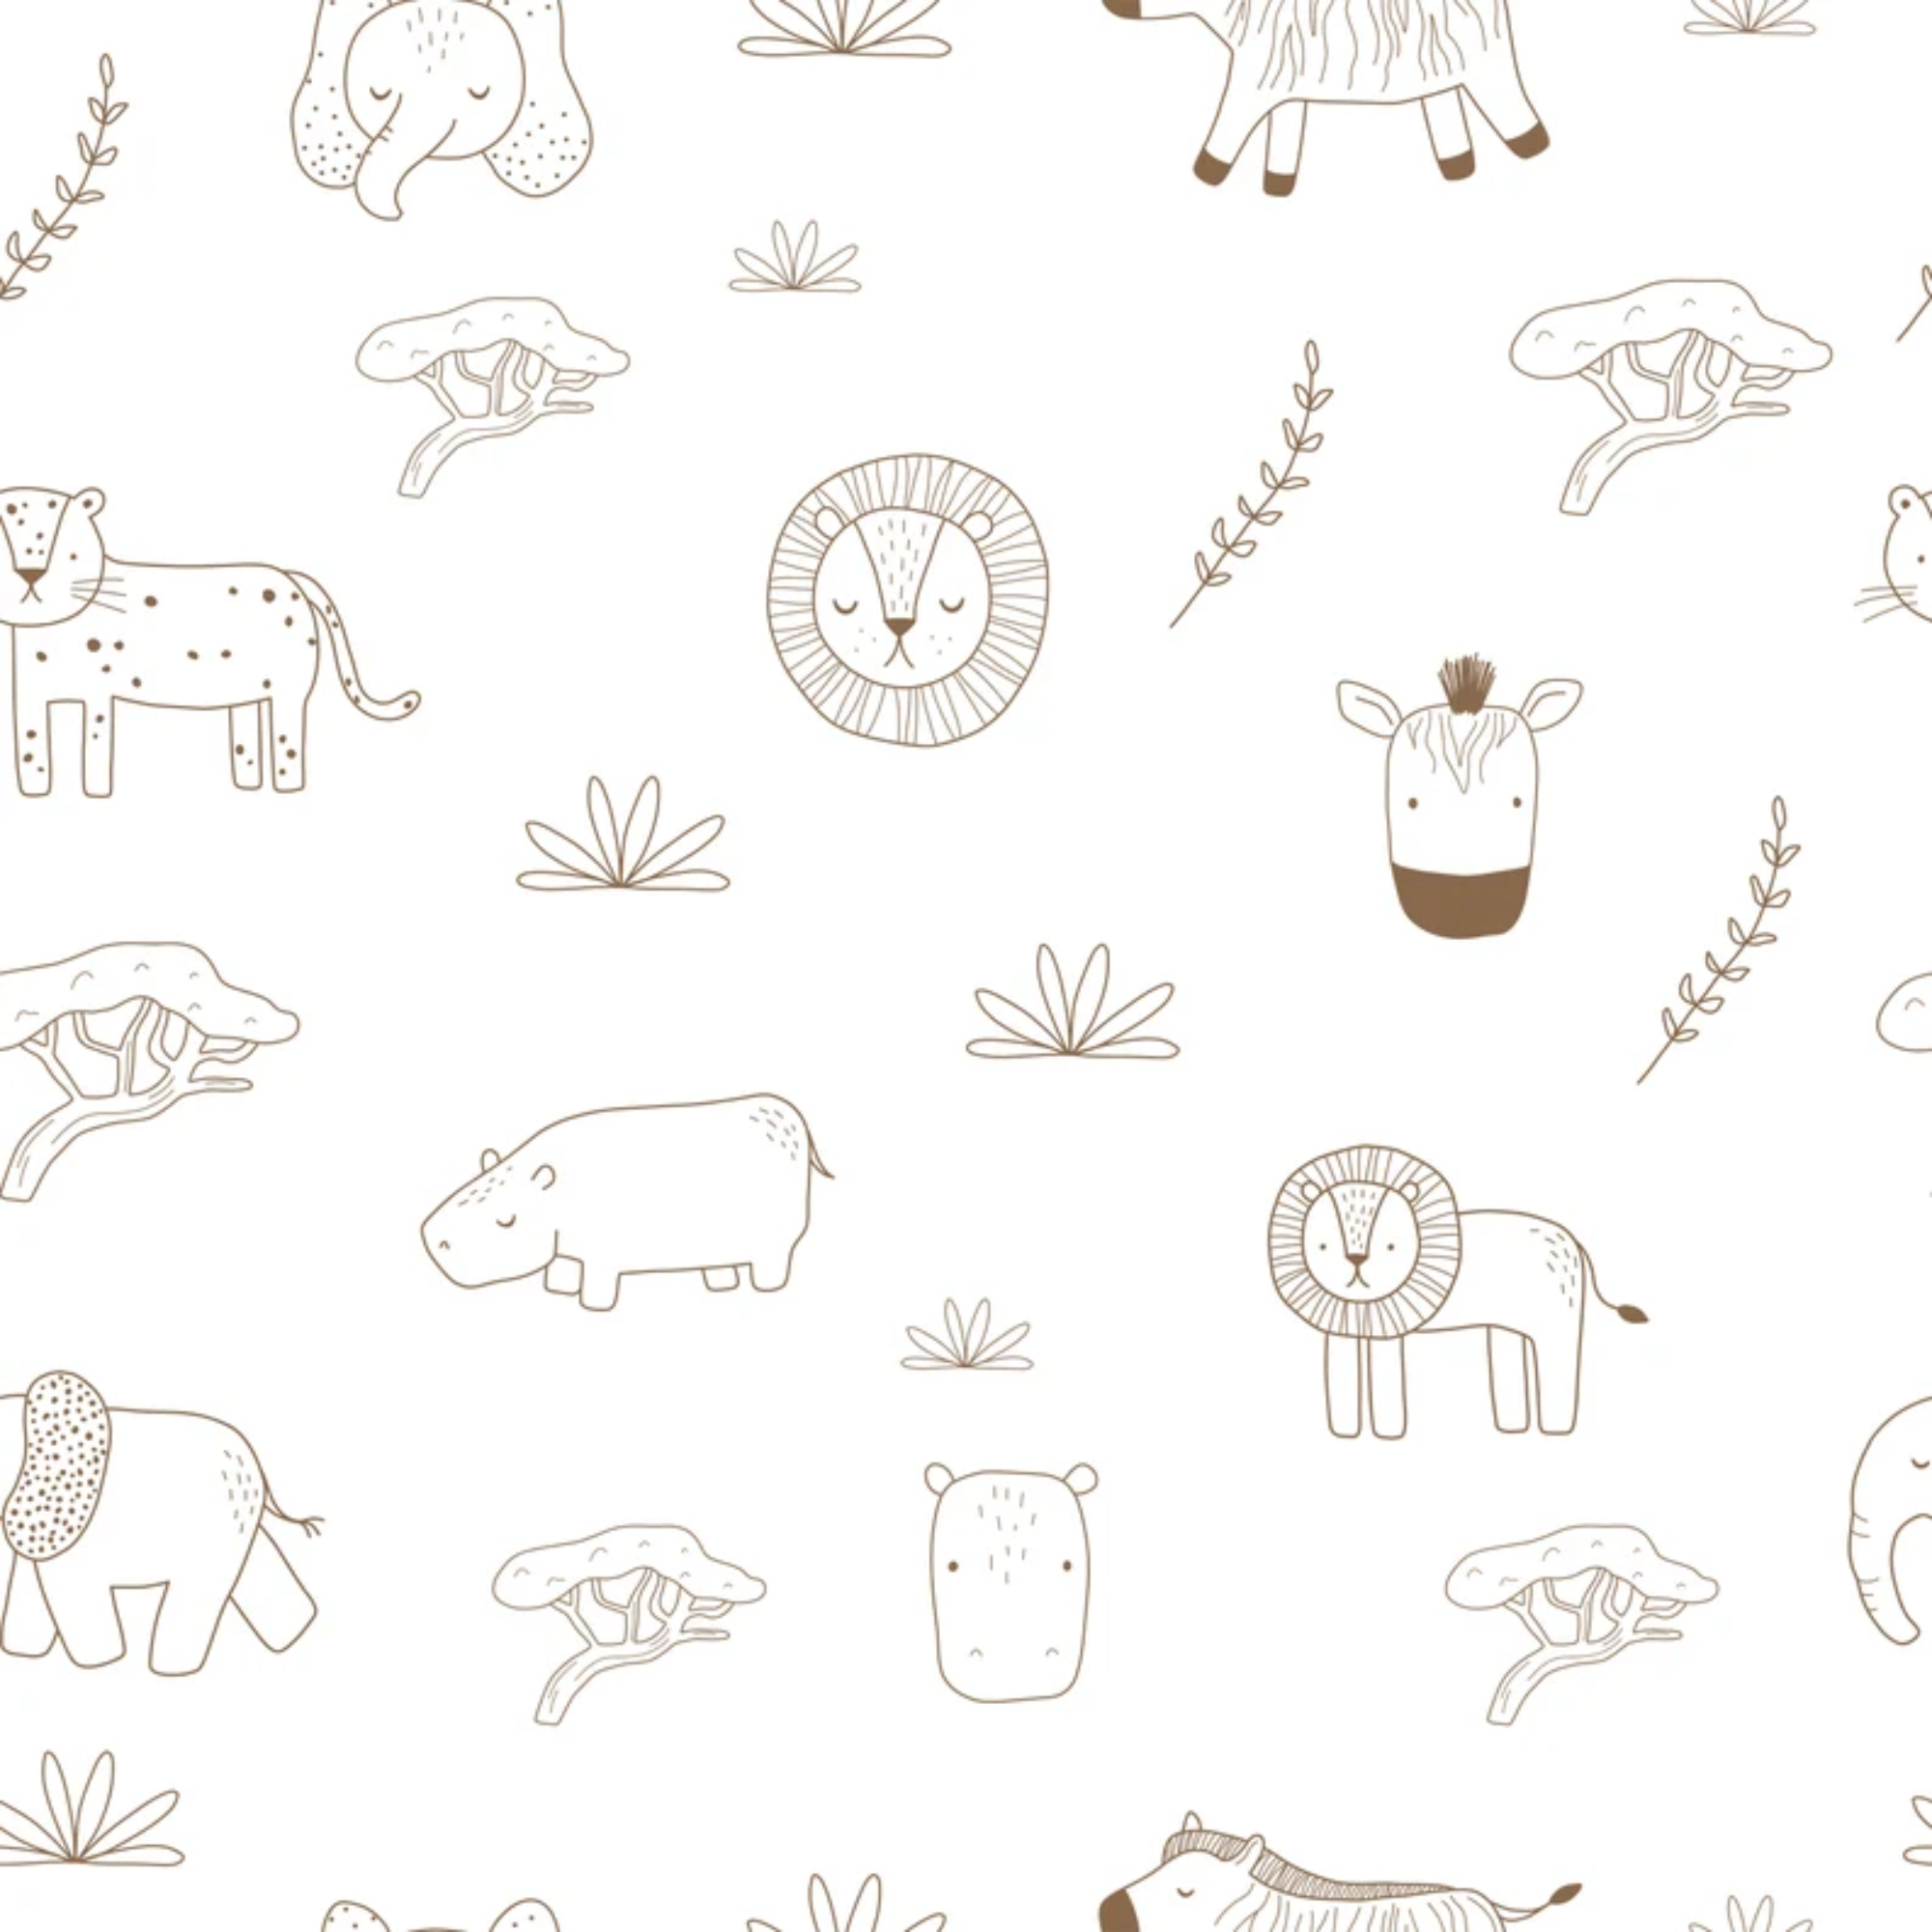 Close up of Safari Jungle Wallpaper featuring a pattern of sketched animals including lions, giraffes, elephants, and zebras in brown outlines on a white background, with small accents of green foliage, creating a playful and educational atmosphere for a child's room.